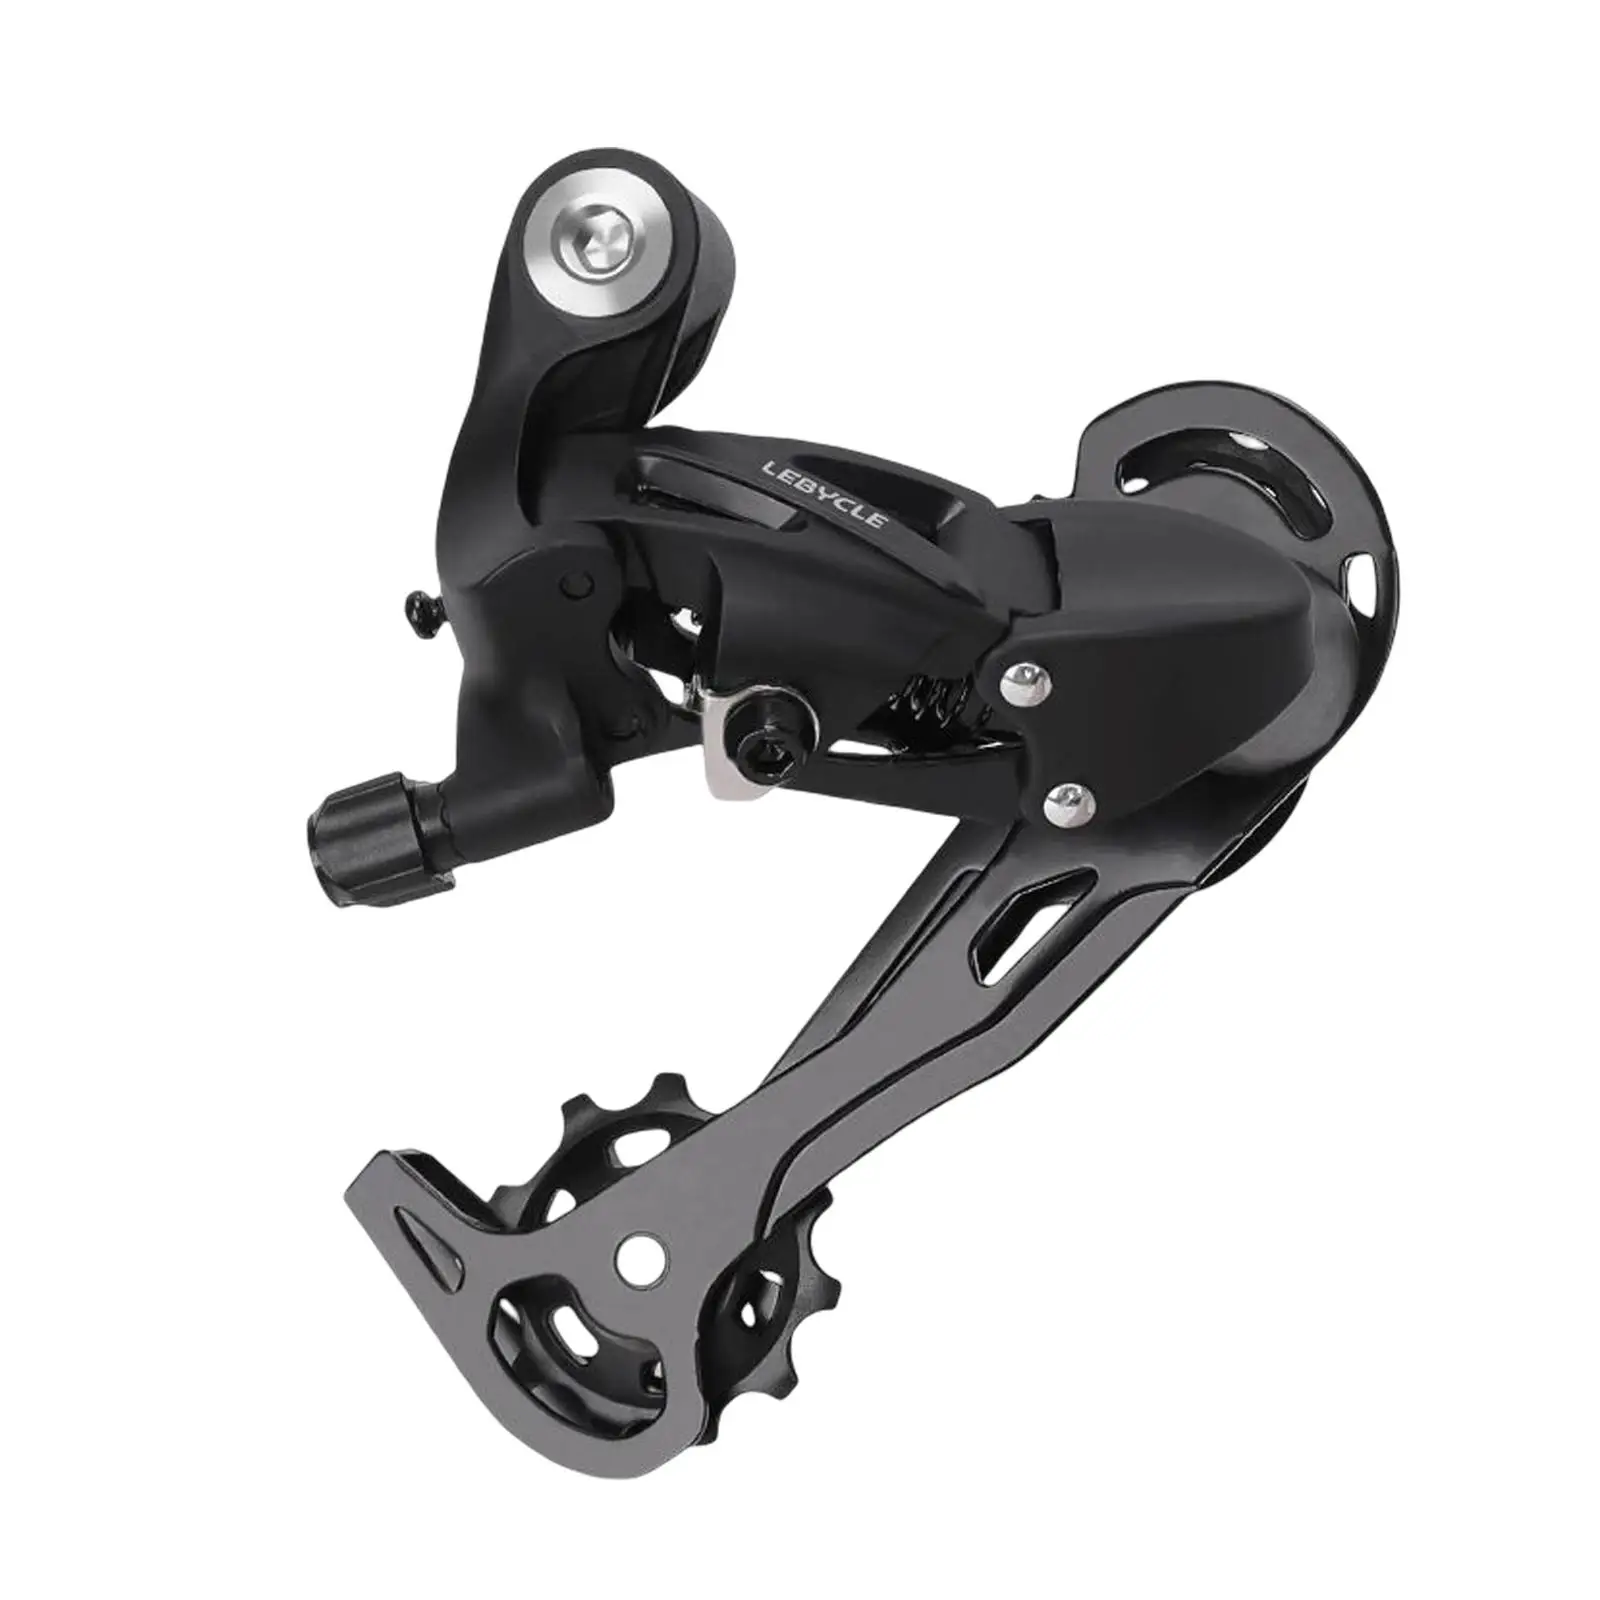 Bicycle Rear Derailleur Single Speed for Mountain Road Bike Tension Wheel Device Chain Guide Stabilizer Bike Accessories